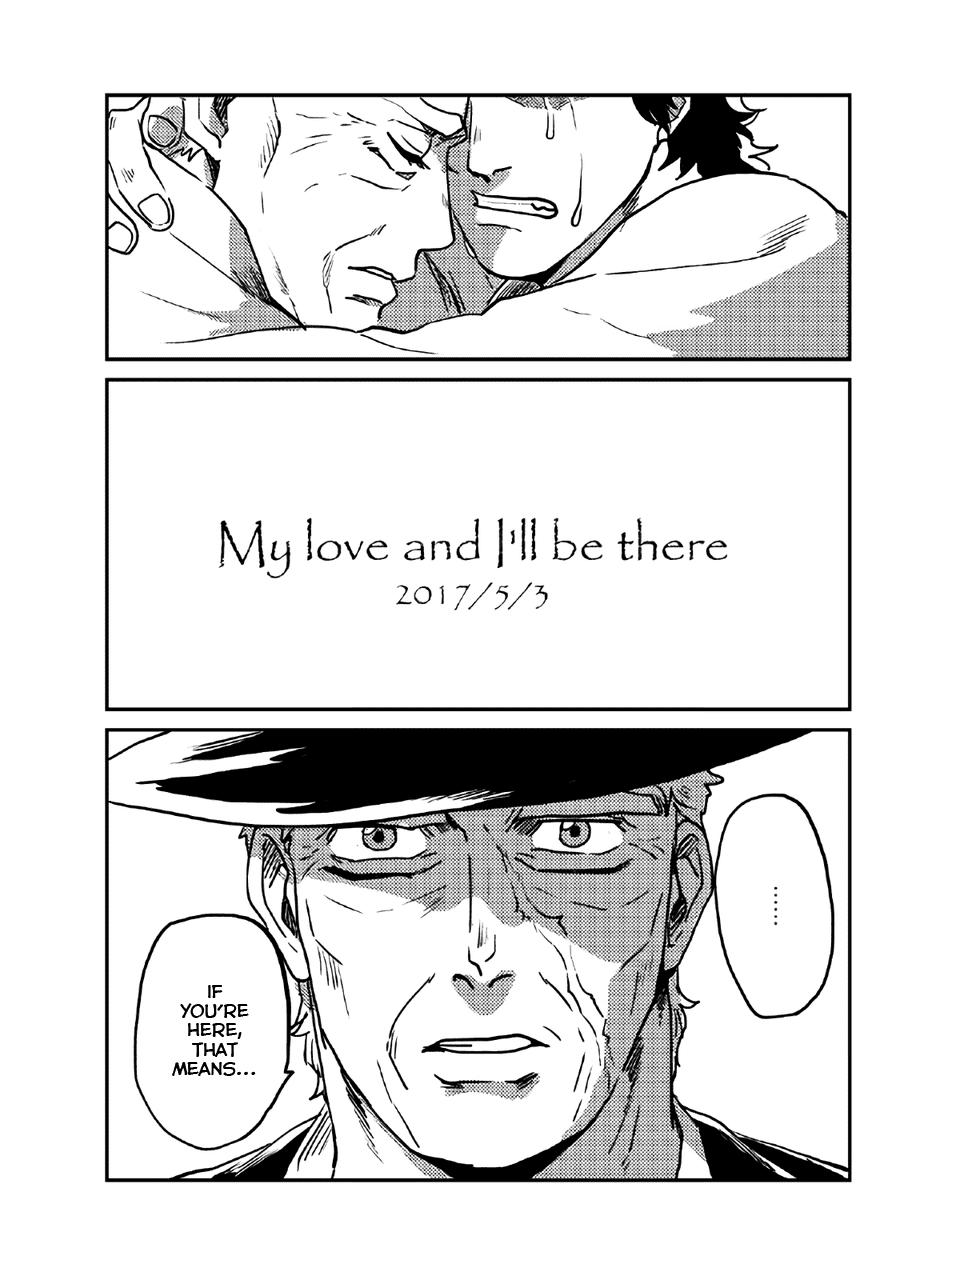 JoJo's Bizarre Adventure Brilliant Days Speedwagon's glory days (Doujinshi) Ch. 4 My love and I'll be there